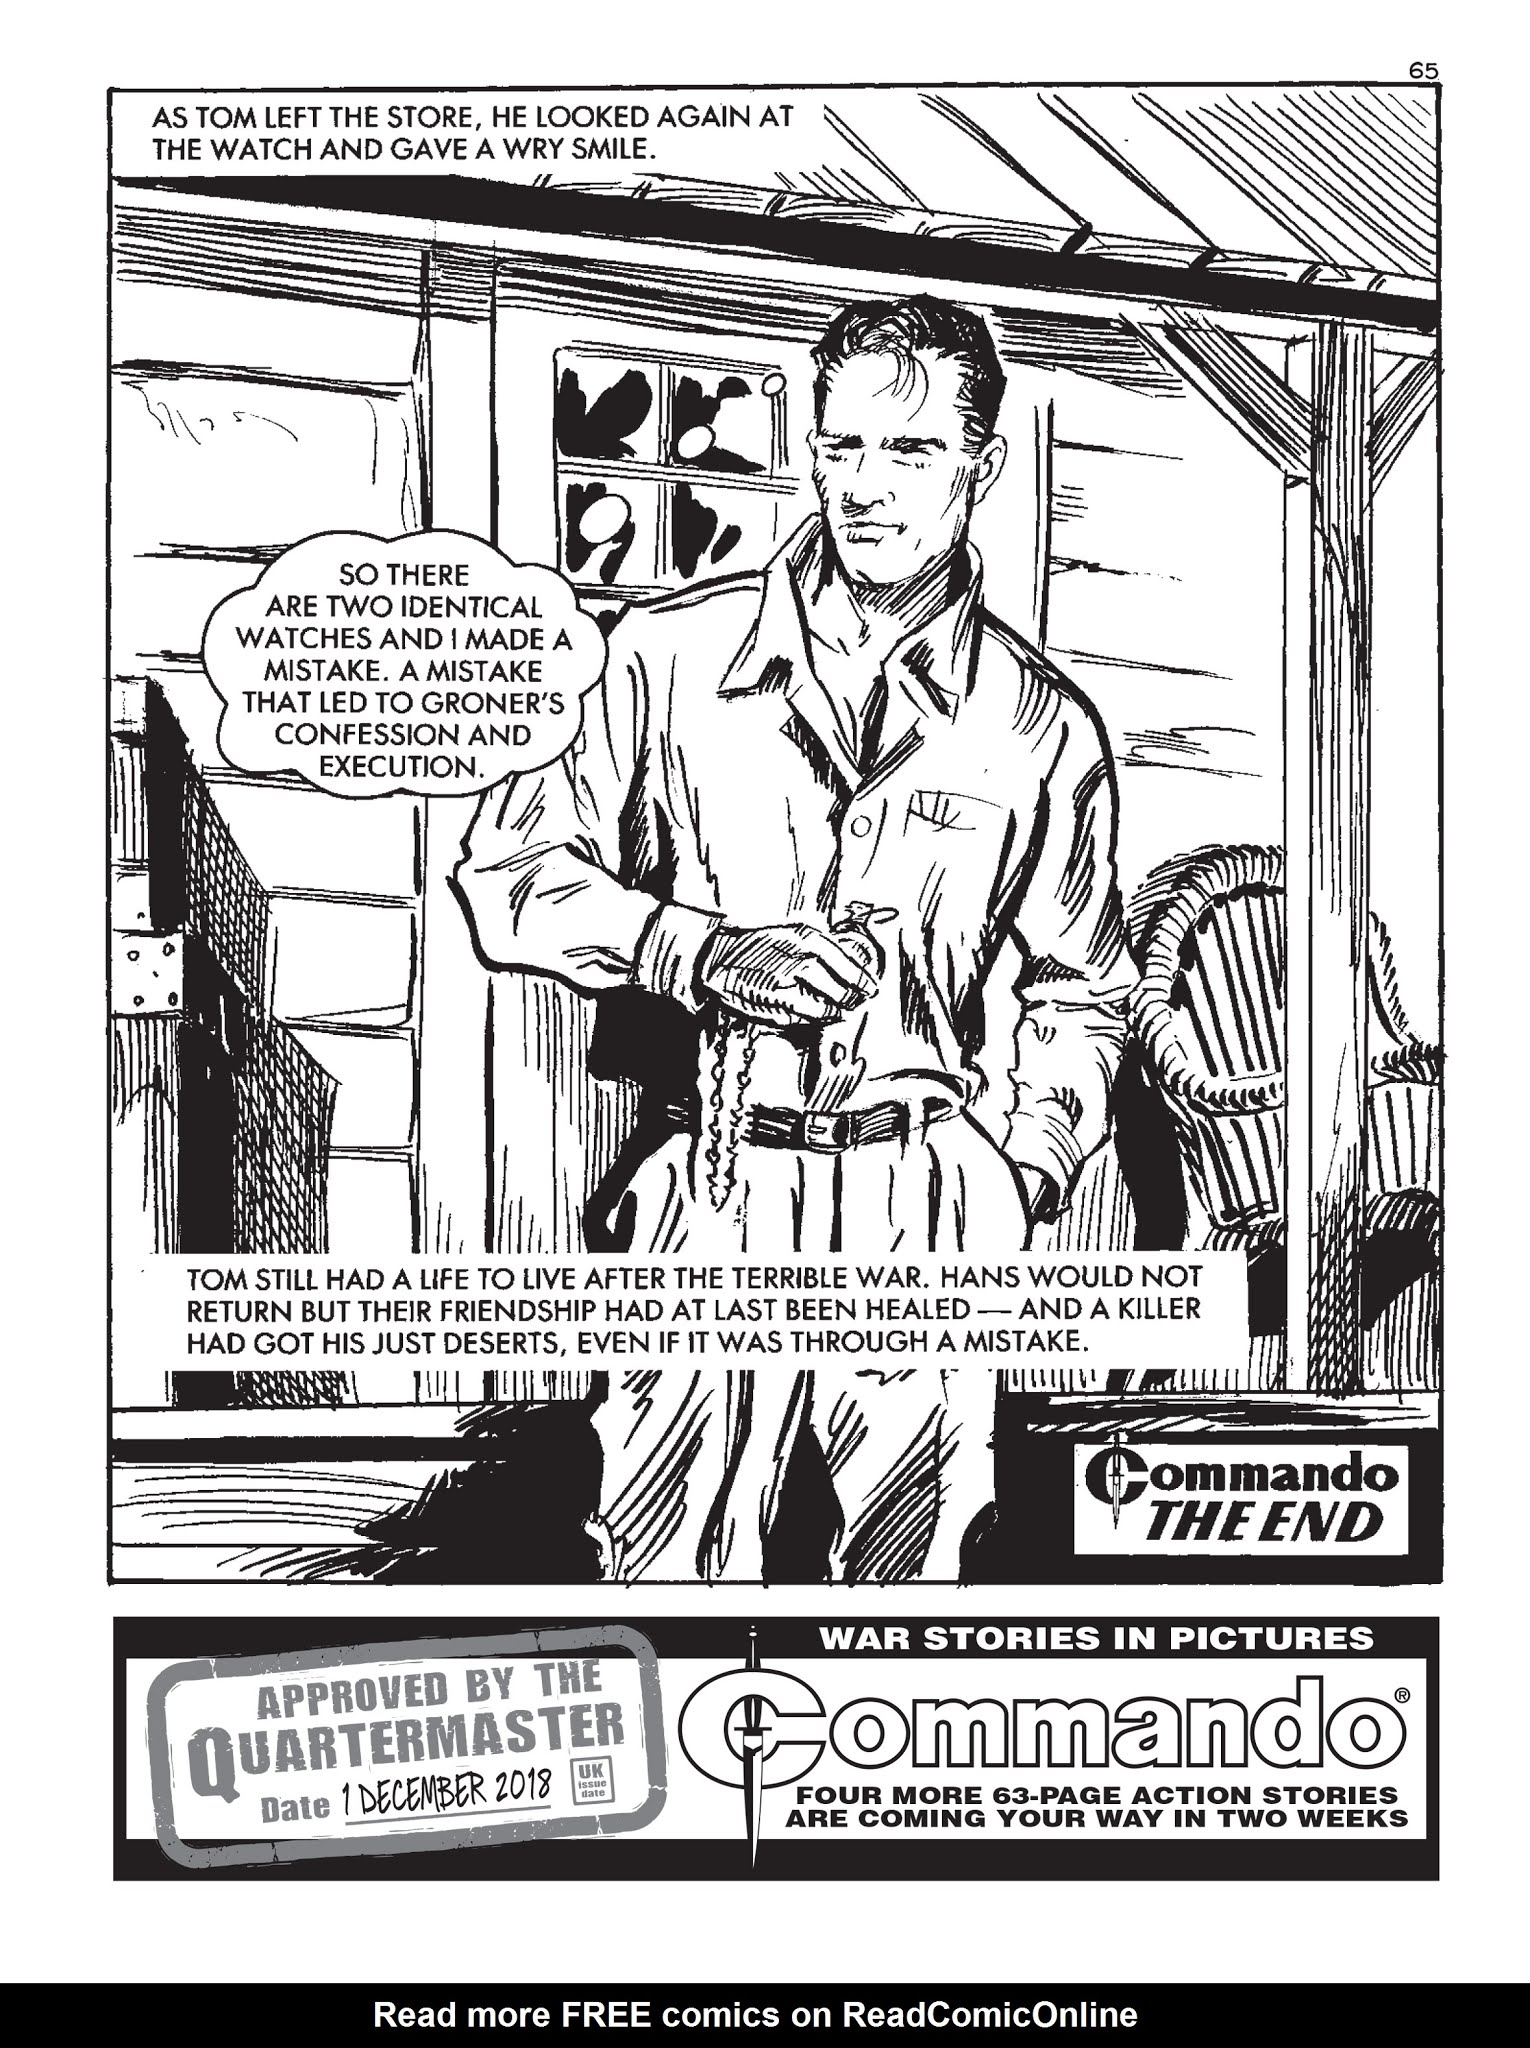 Read online Commando: For Action and Adventure comic -  Issue #5176 - 65